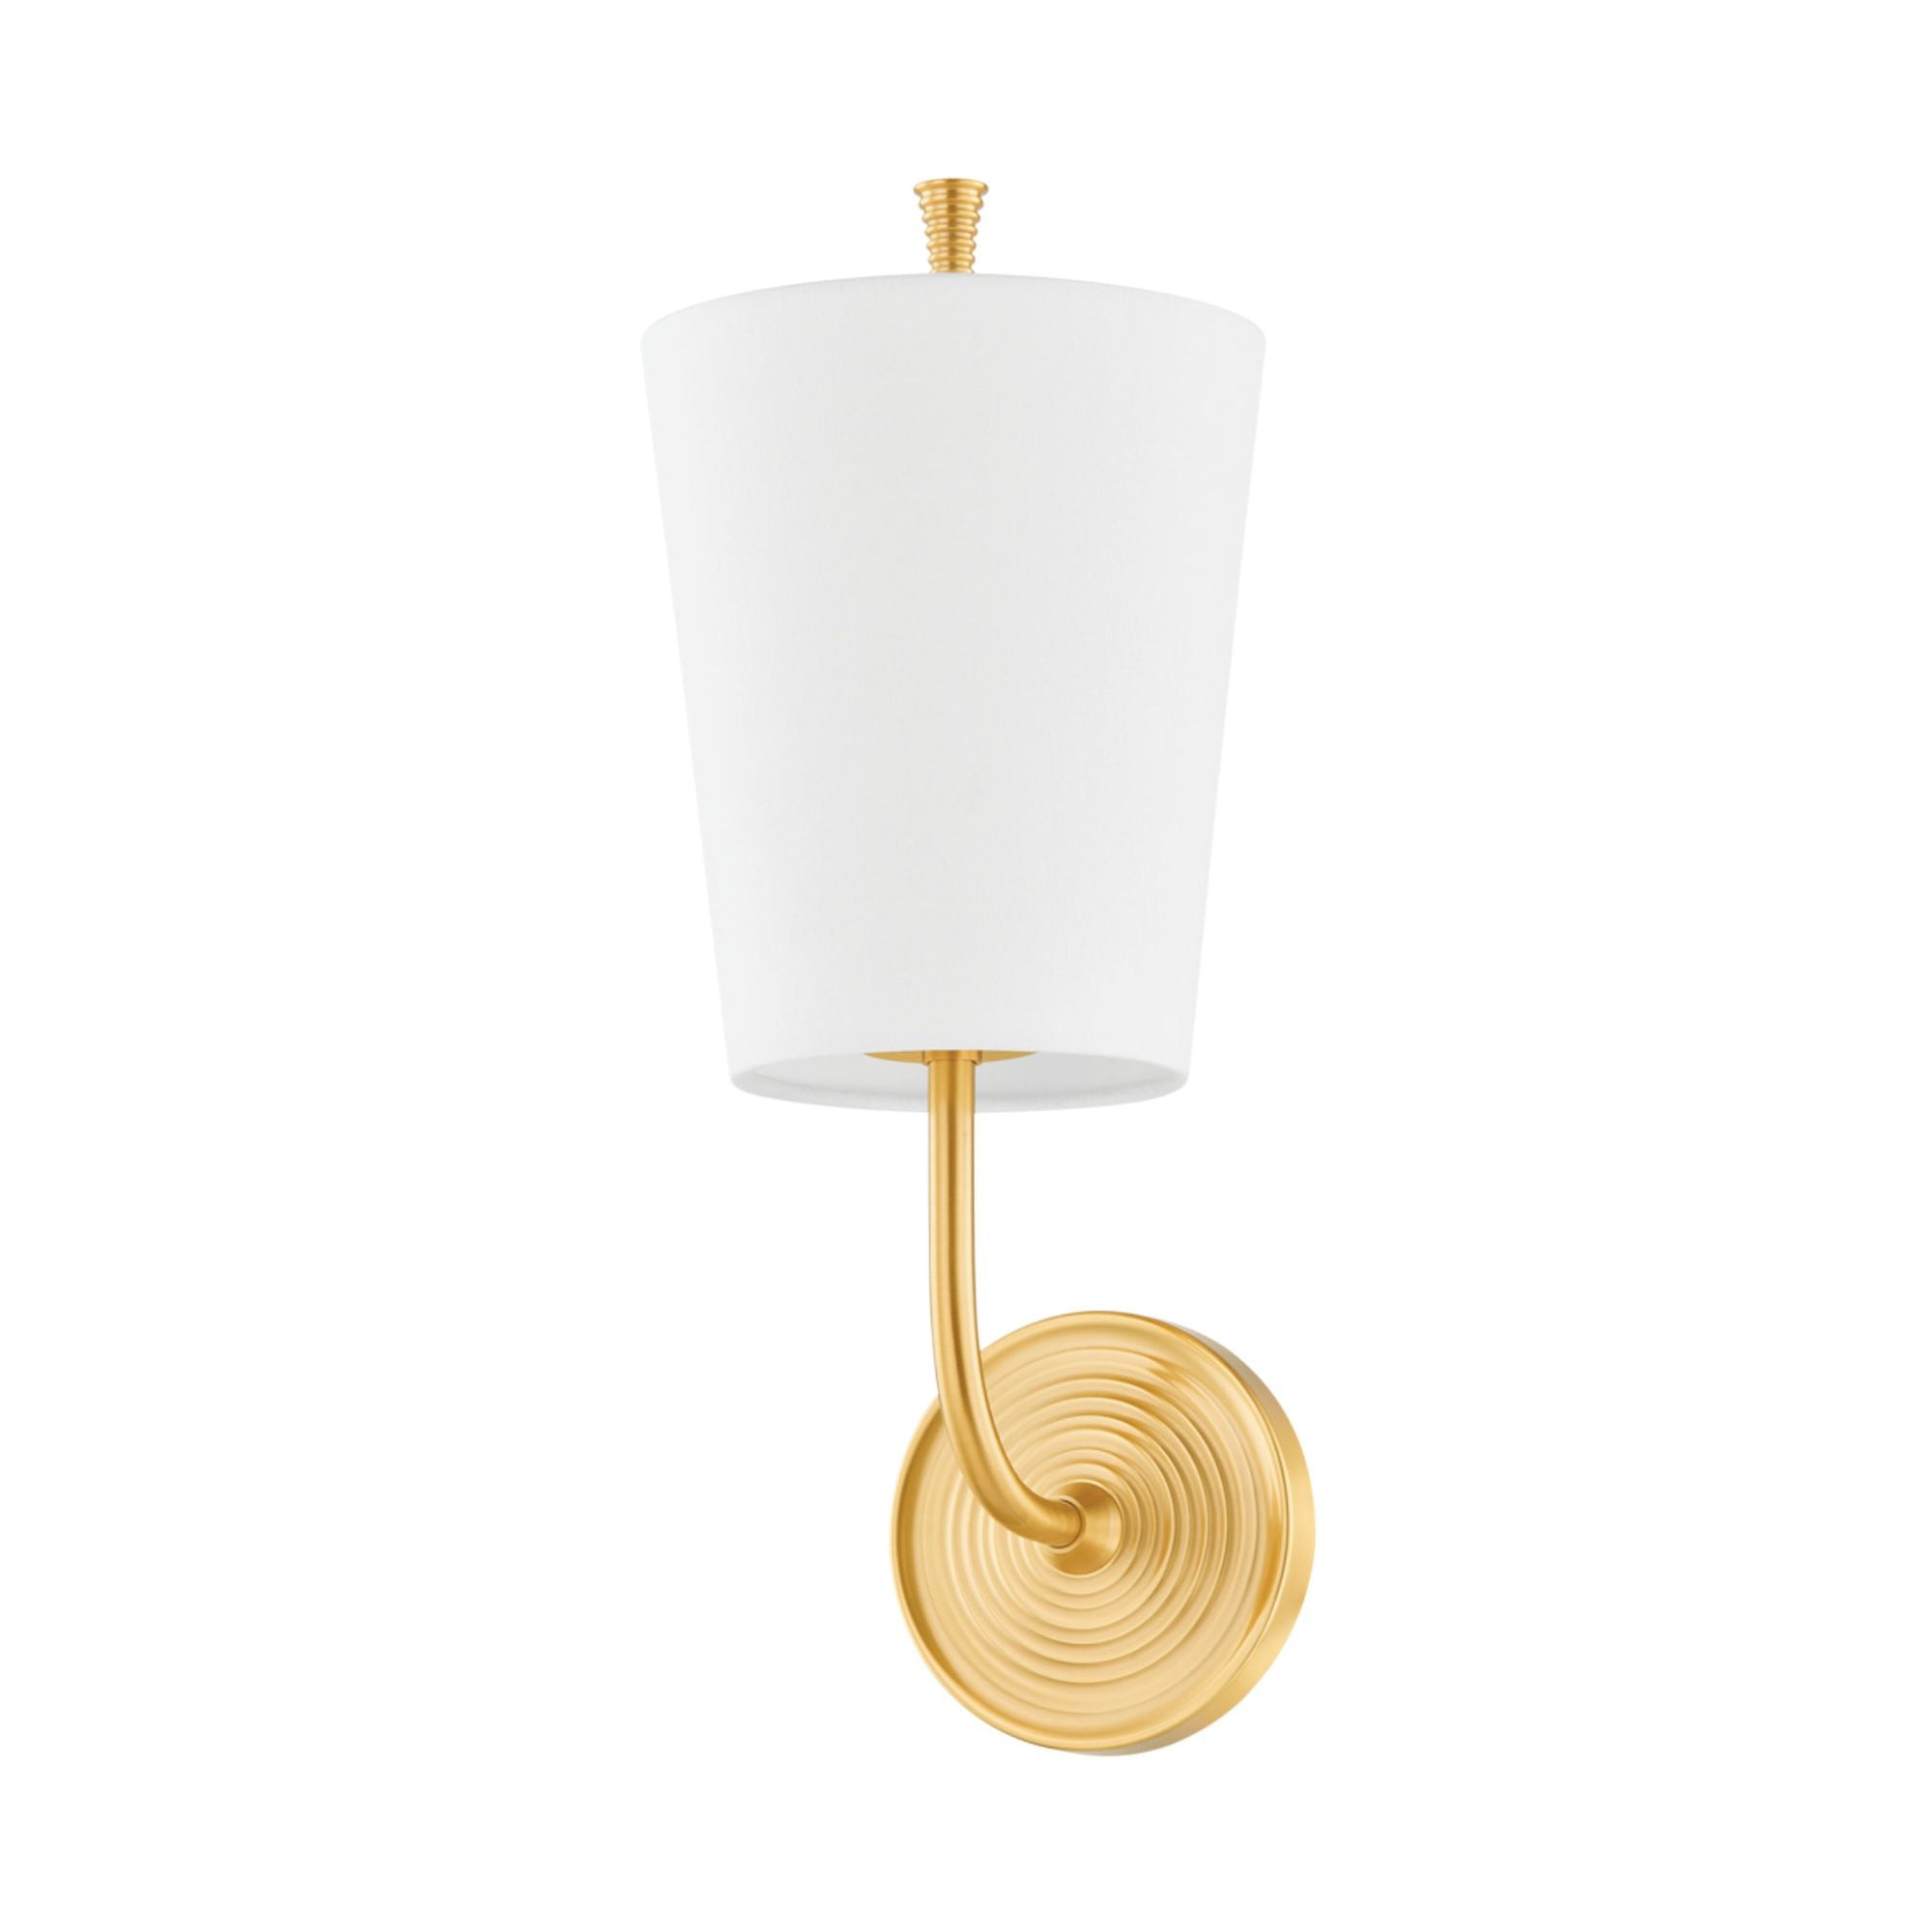 Gladstone 1 Light Wall Sconce in Aged Brass